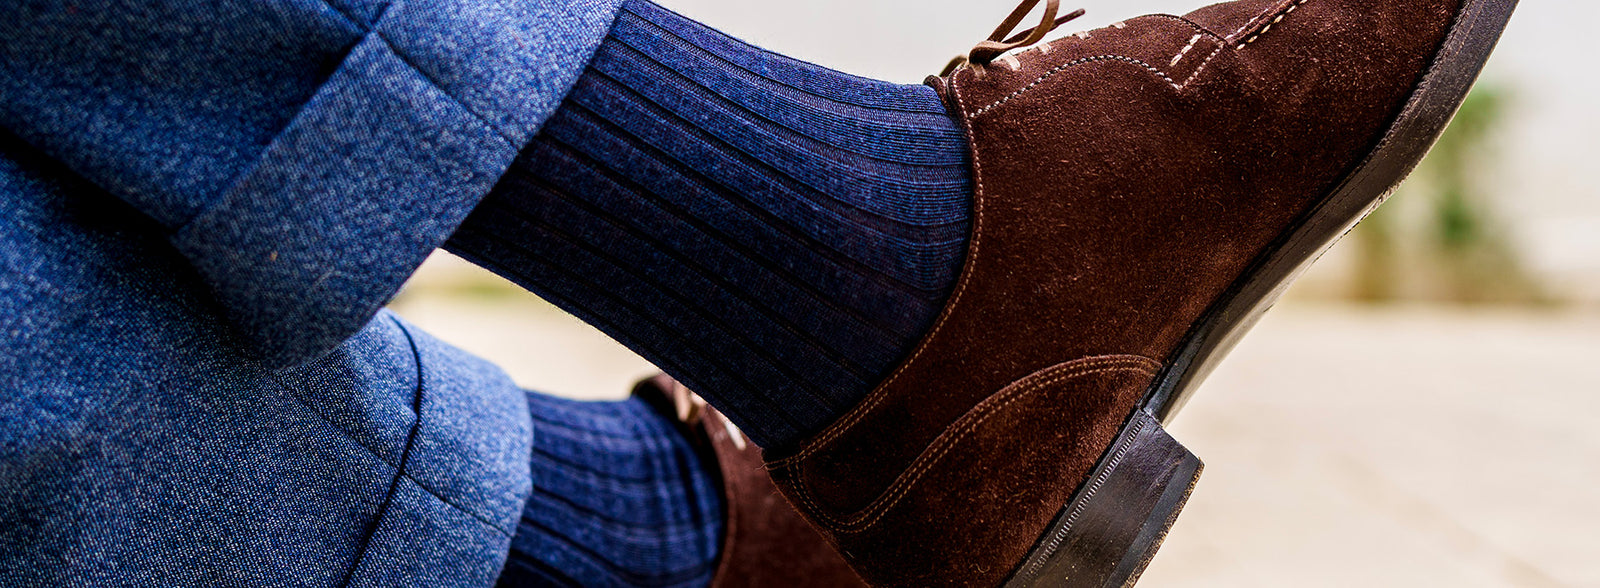 How to Wear Socks with Pants Stylishly this Winter - Dressed for